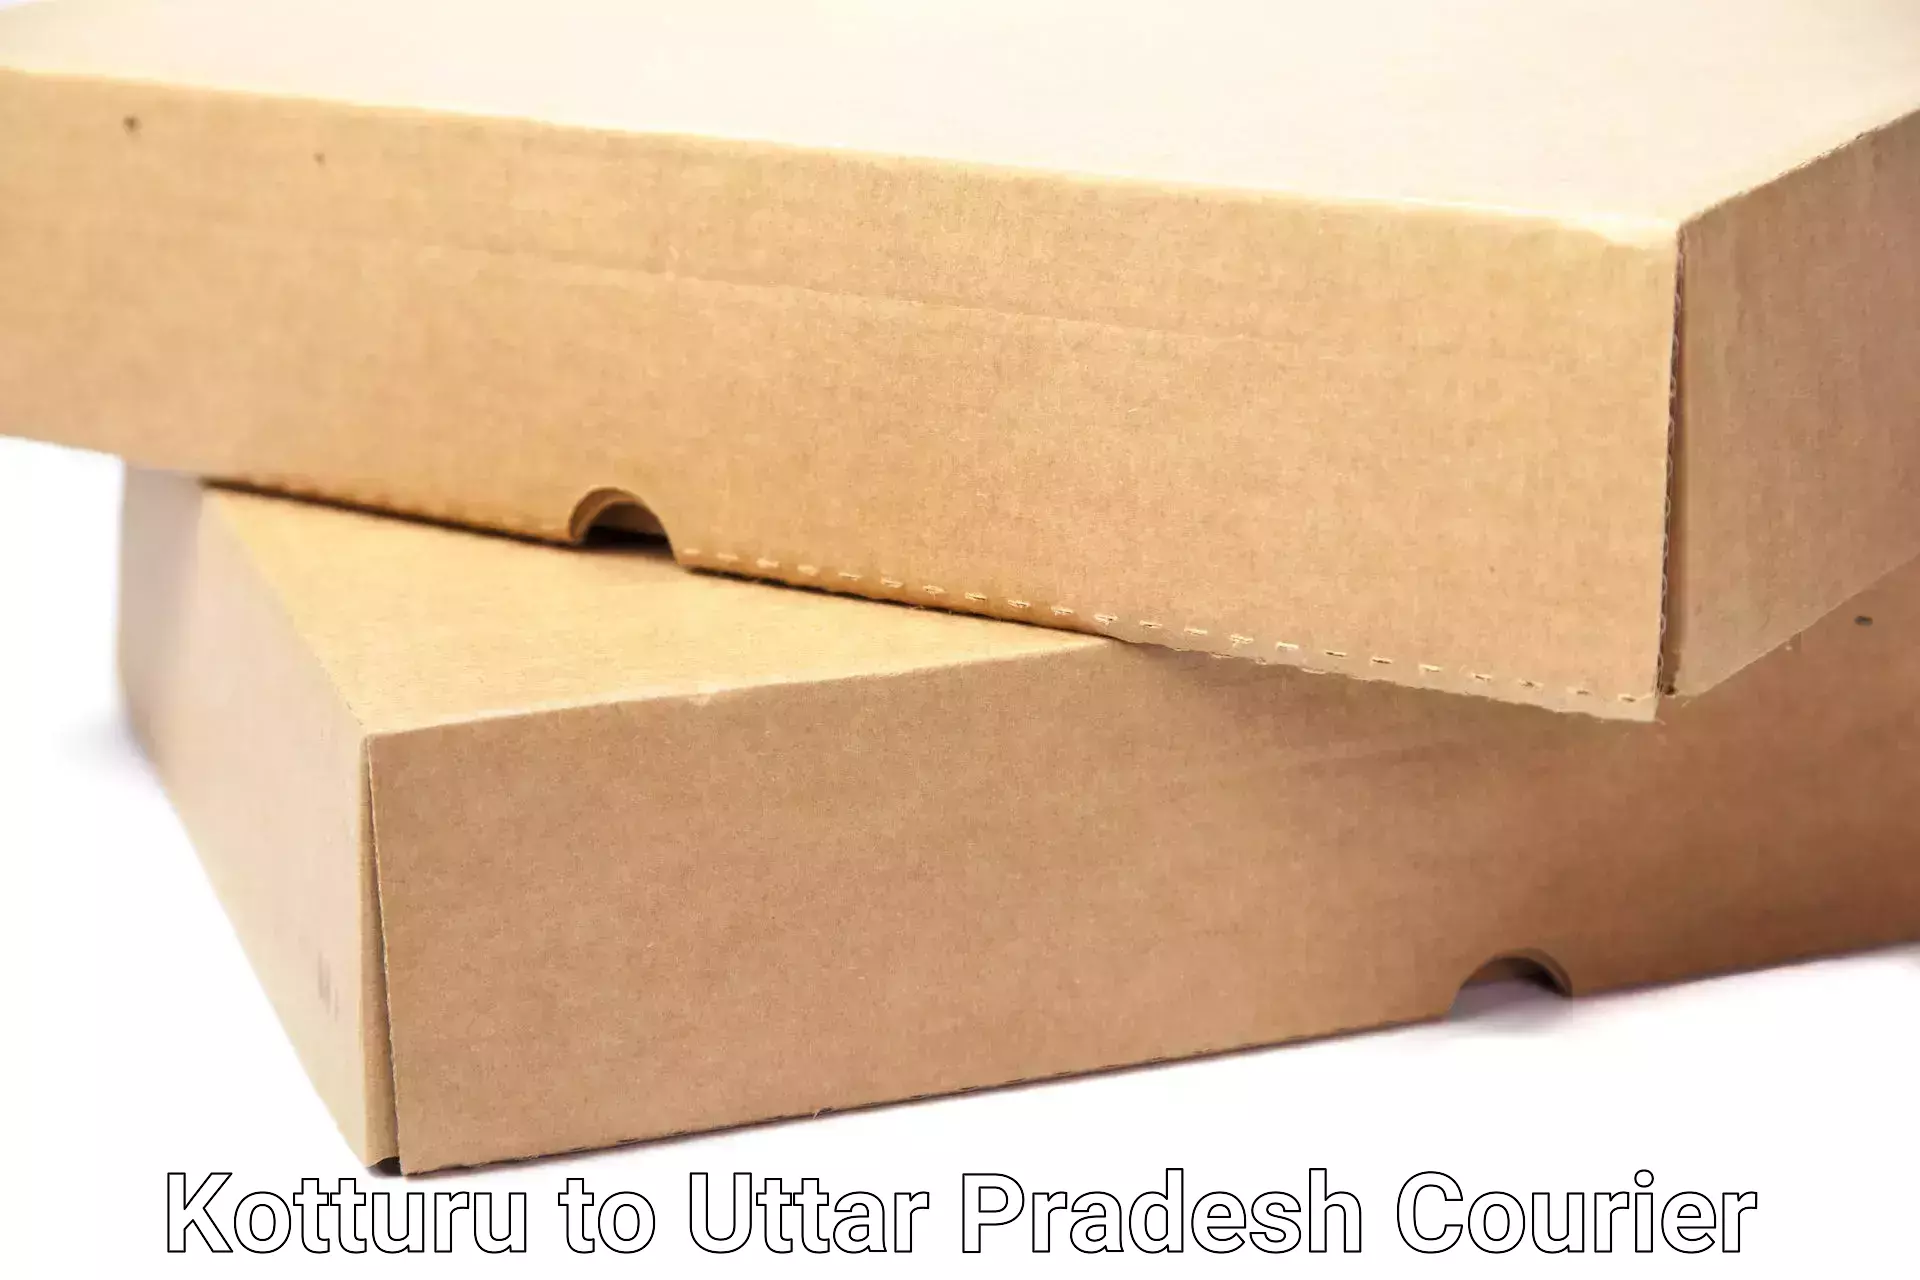 Home relocation and storage in Kotturu to Khutar